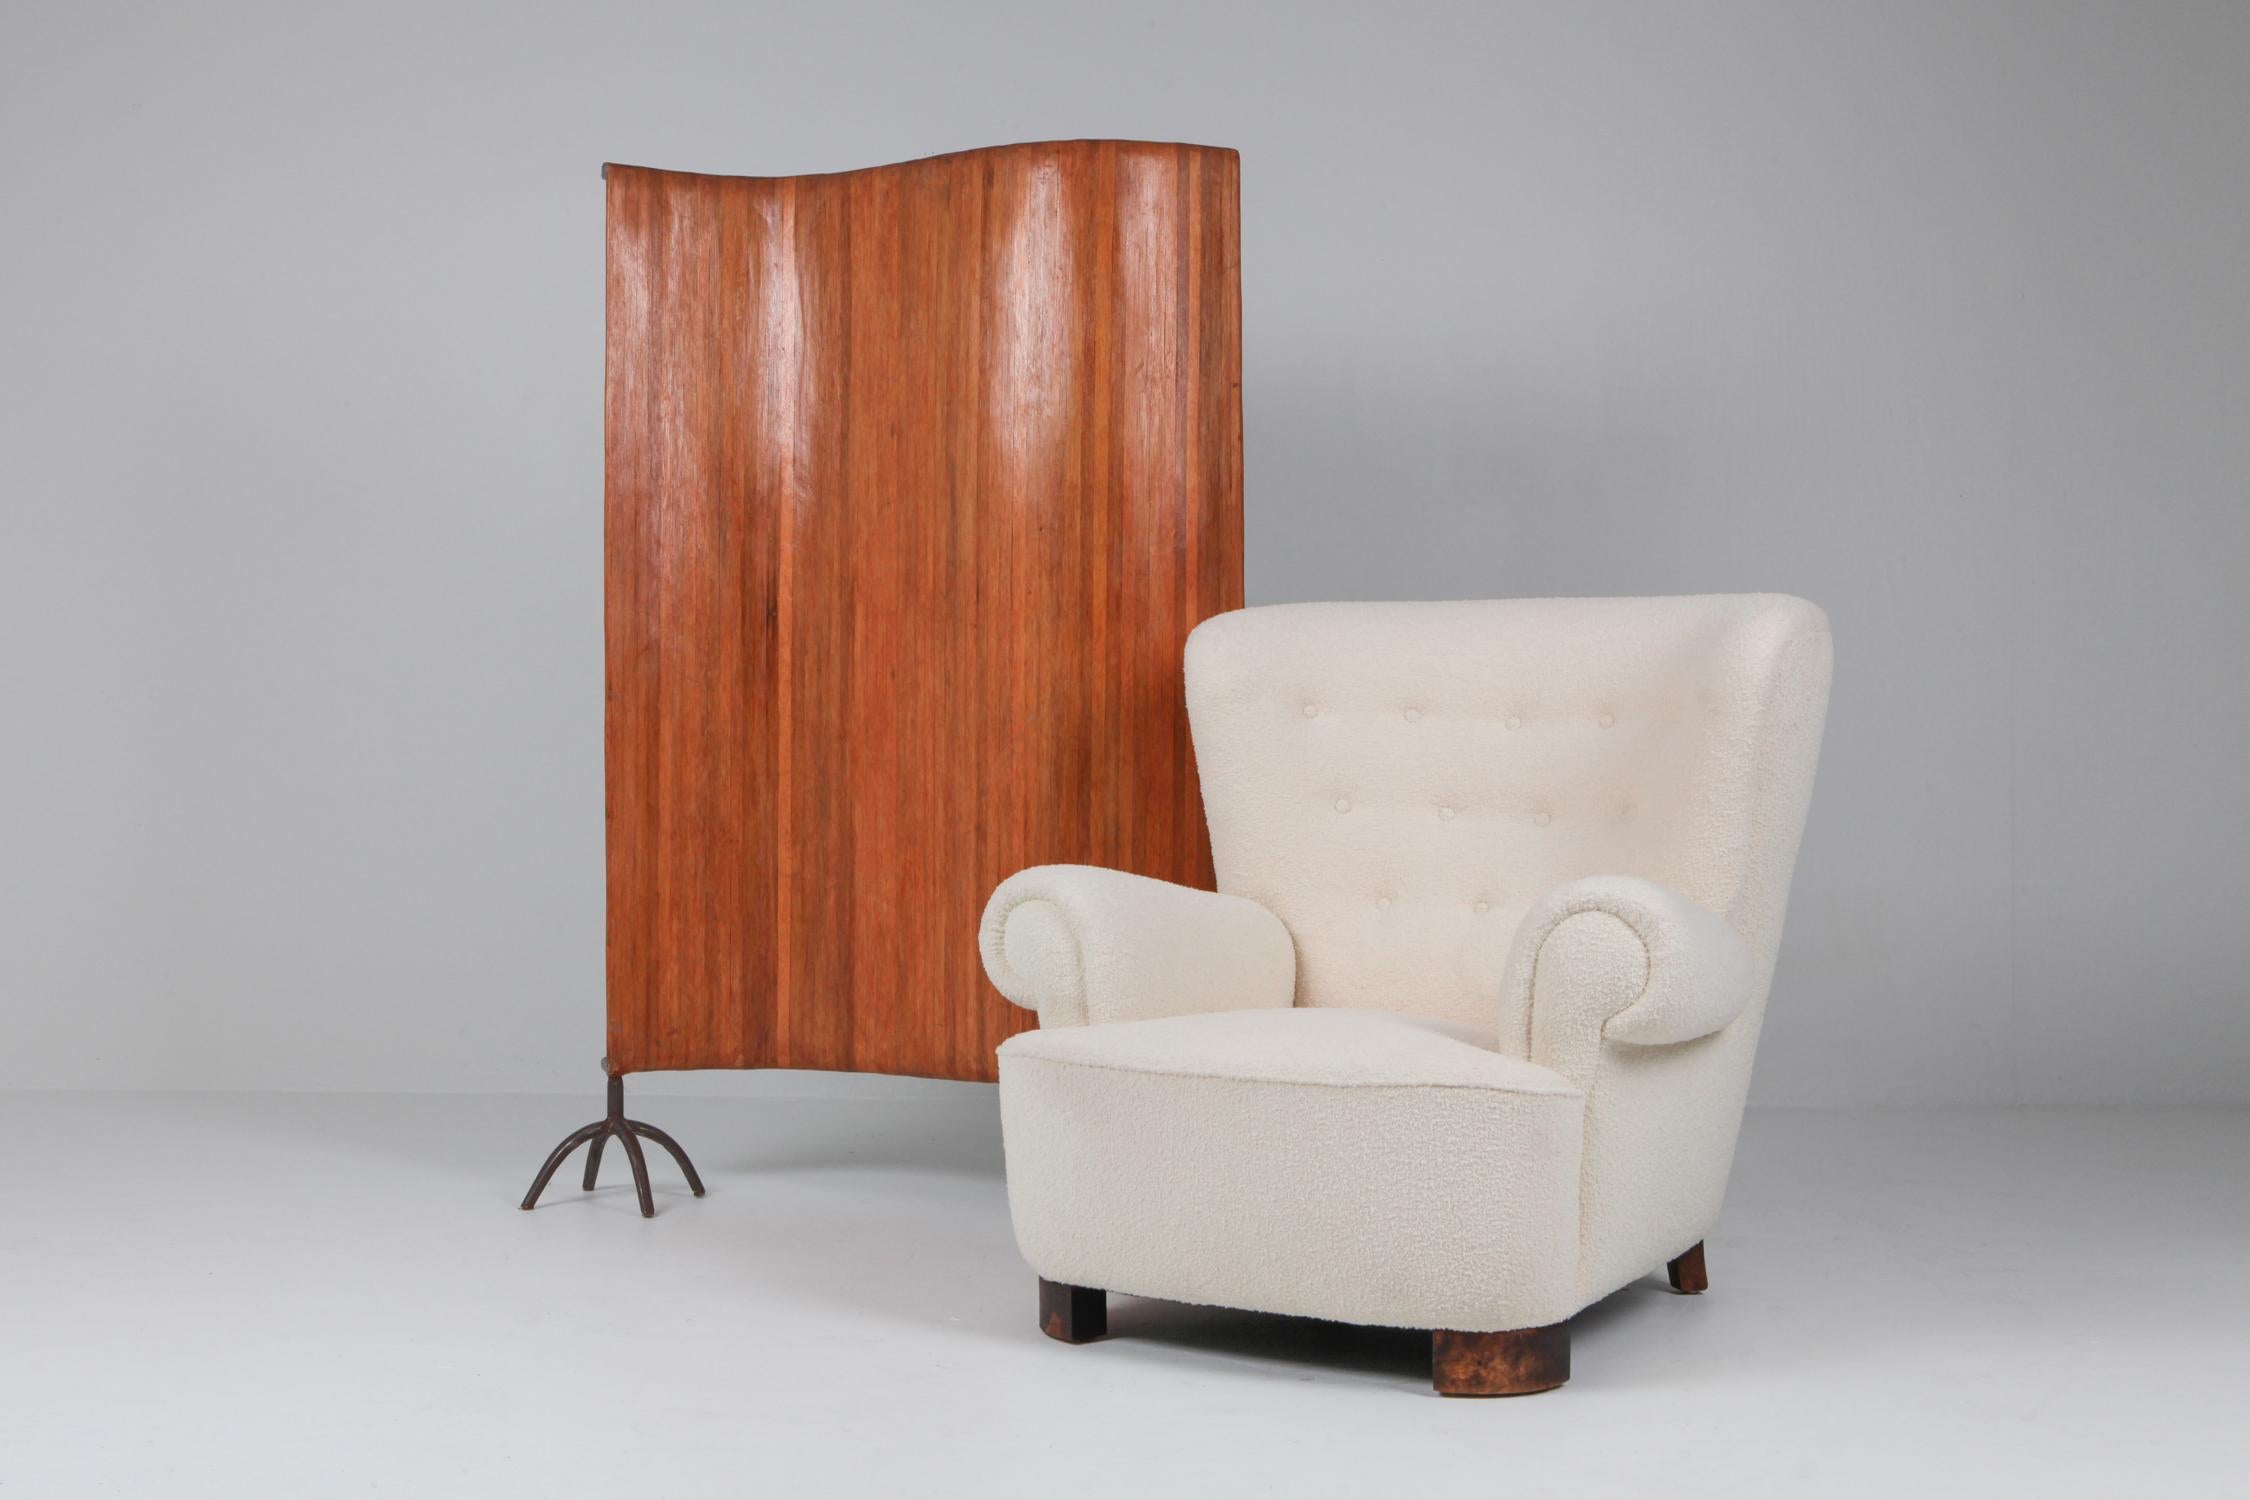 Unusual 'wavey' room divider in an Arts & Crafts meets Brutalist style.
Mahogany and iron

We have three pieces available.

In one of the images you see the piece presented next to a Flemming Lassen Scandinavian Modern bergère.
      